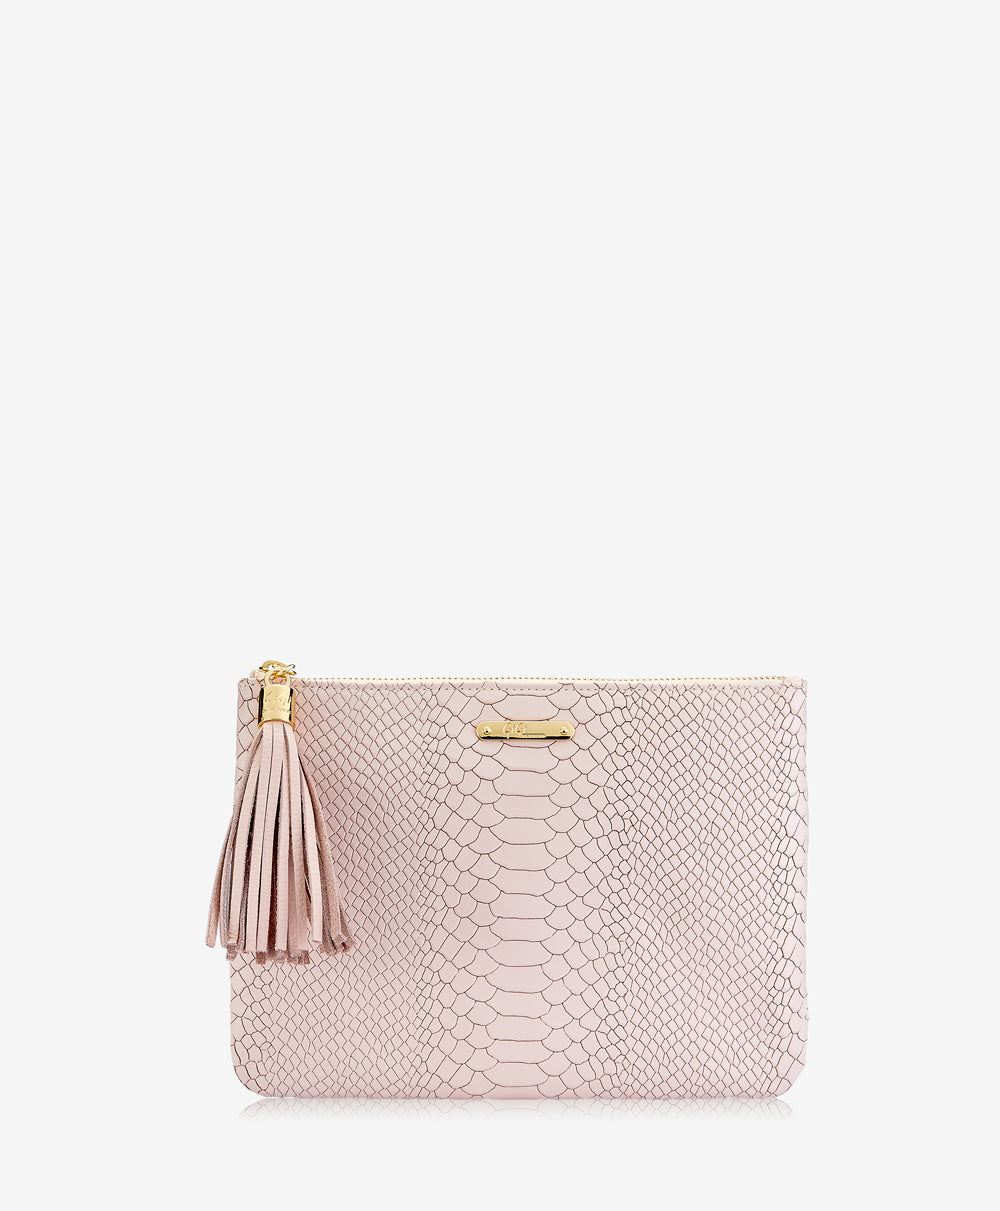 GiGi New York All In One Clutch Bag Nude Embossed Python Leather